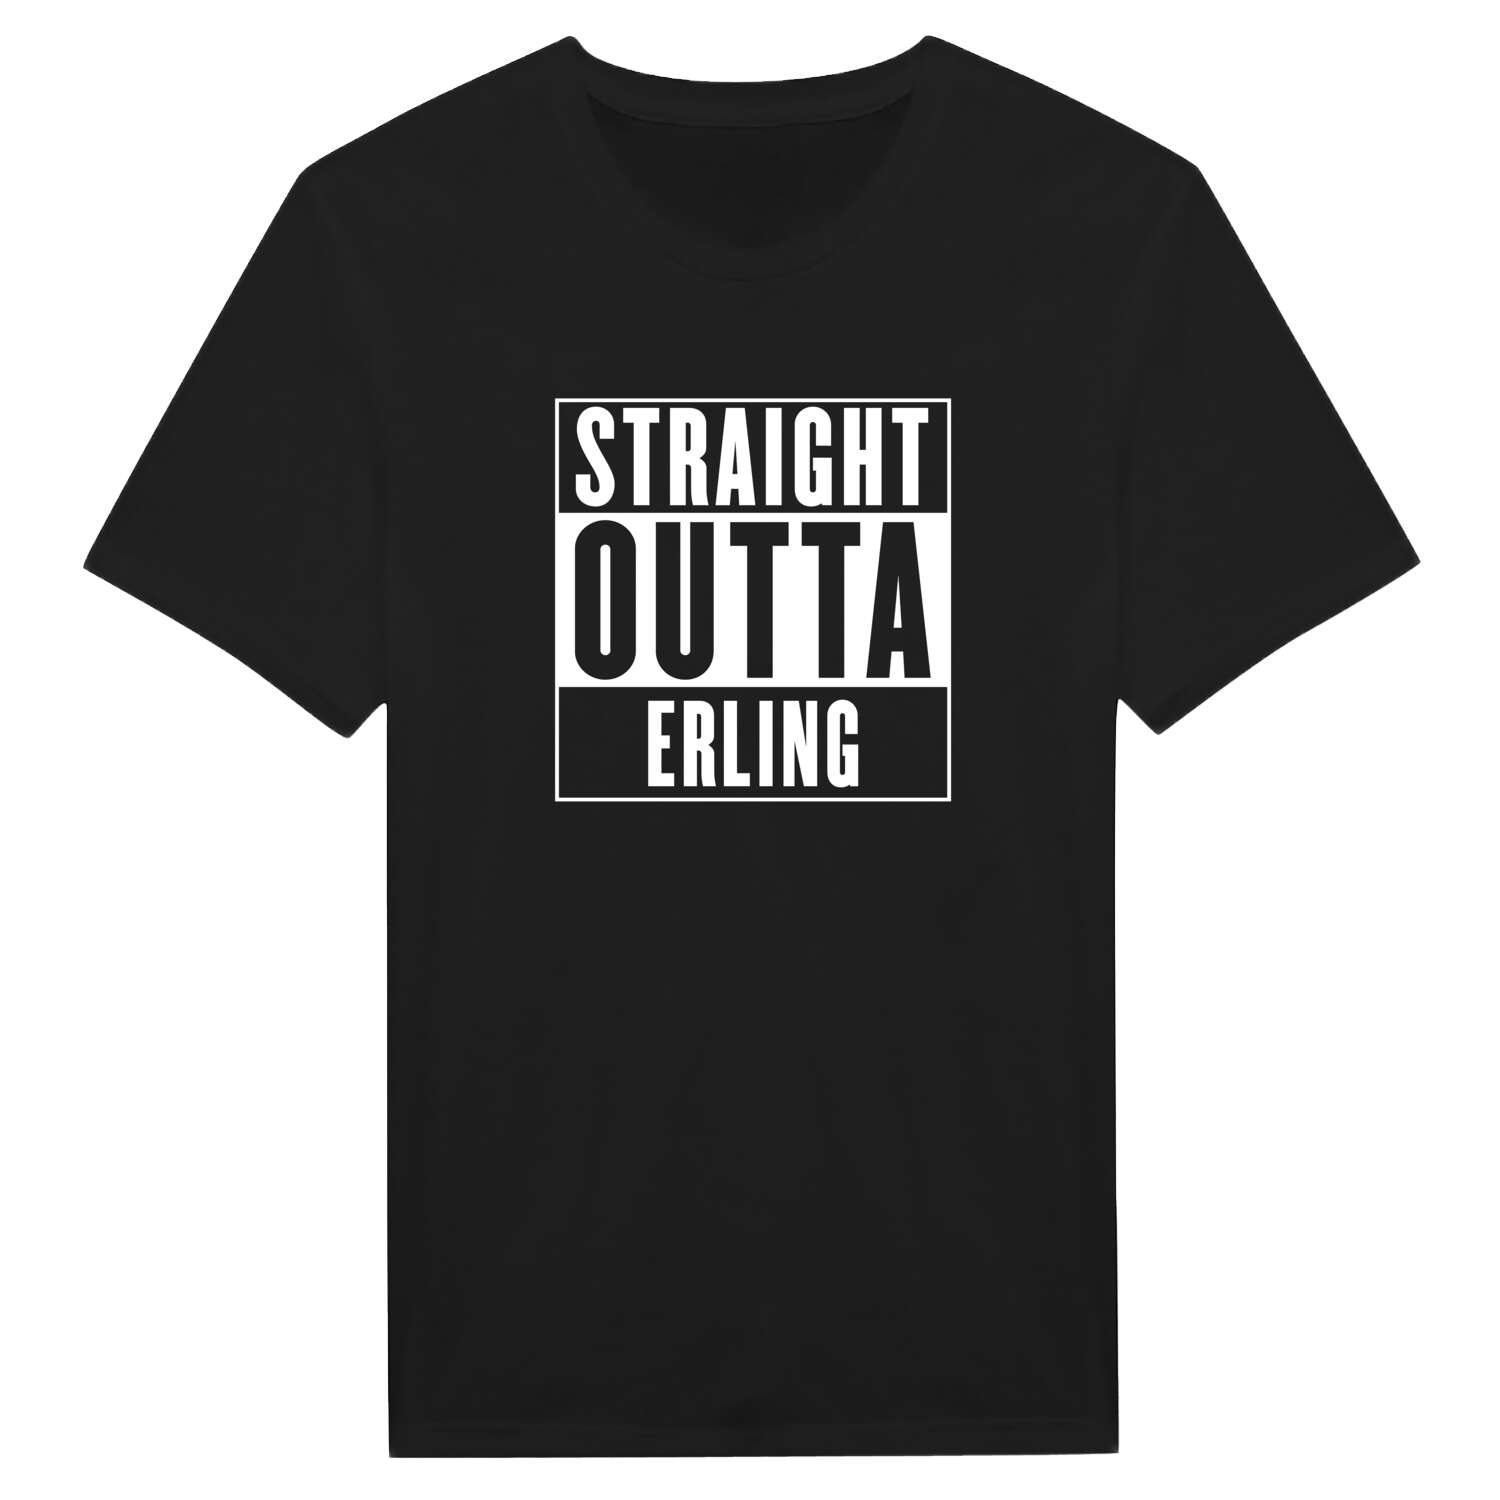 Erling T-Shirt »Straight Outta«